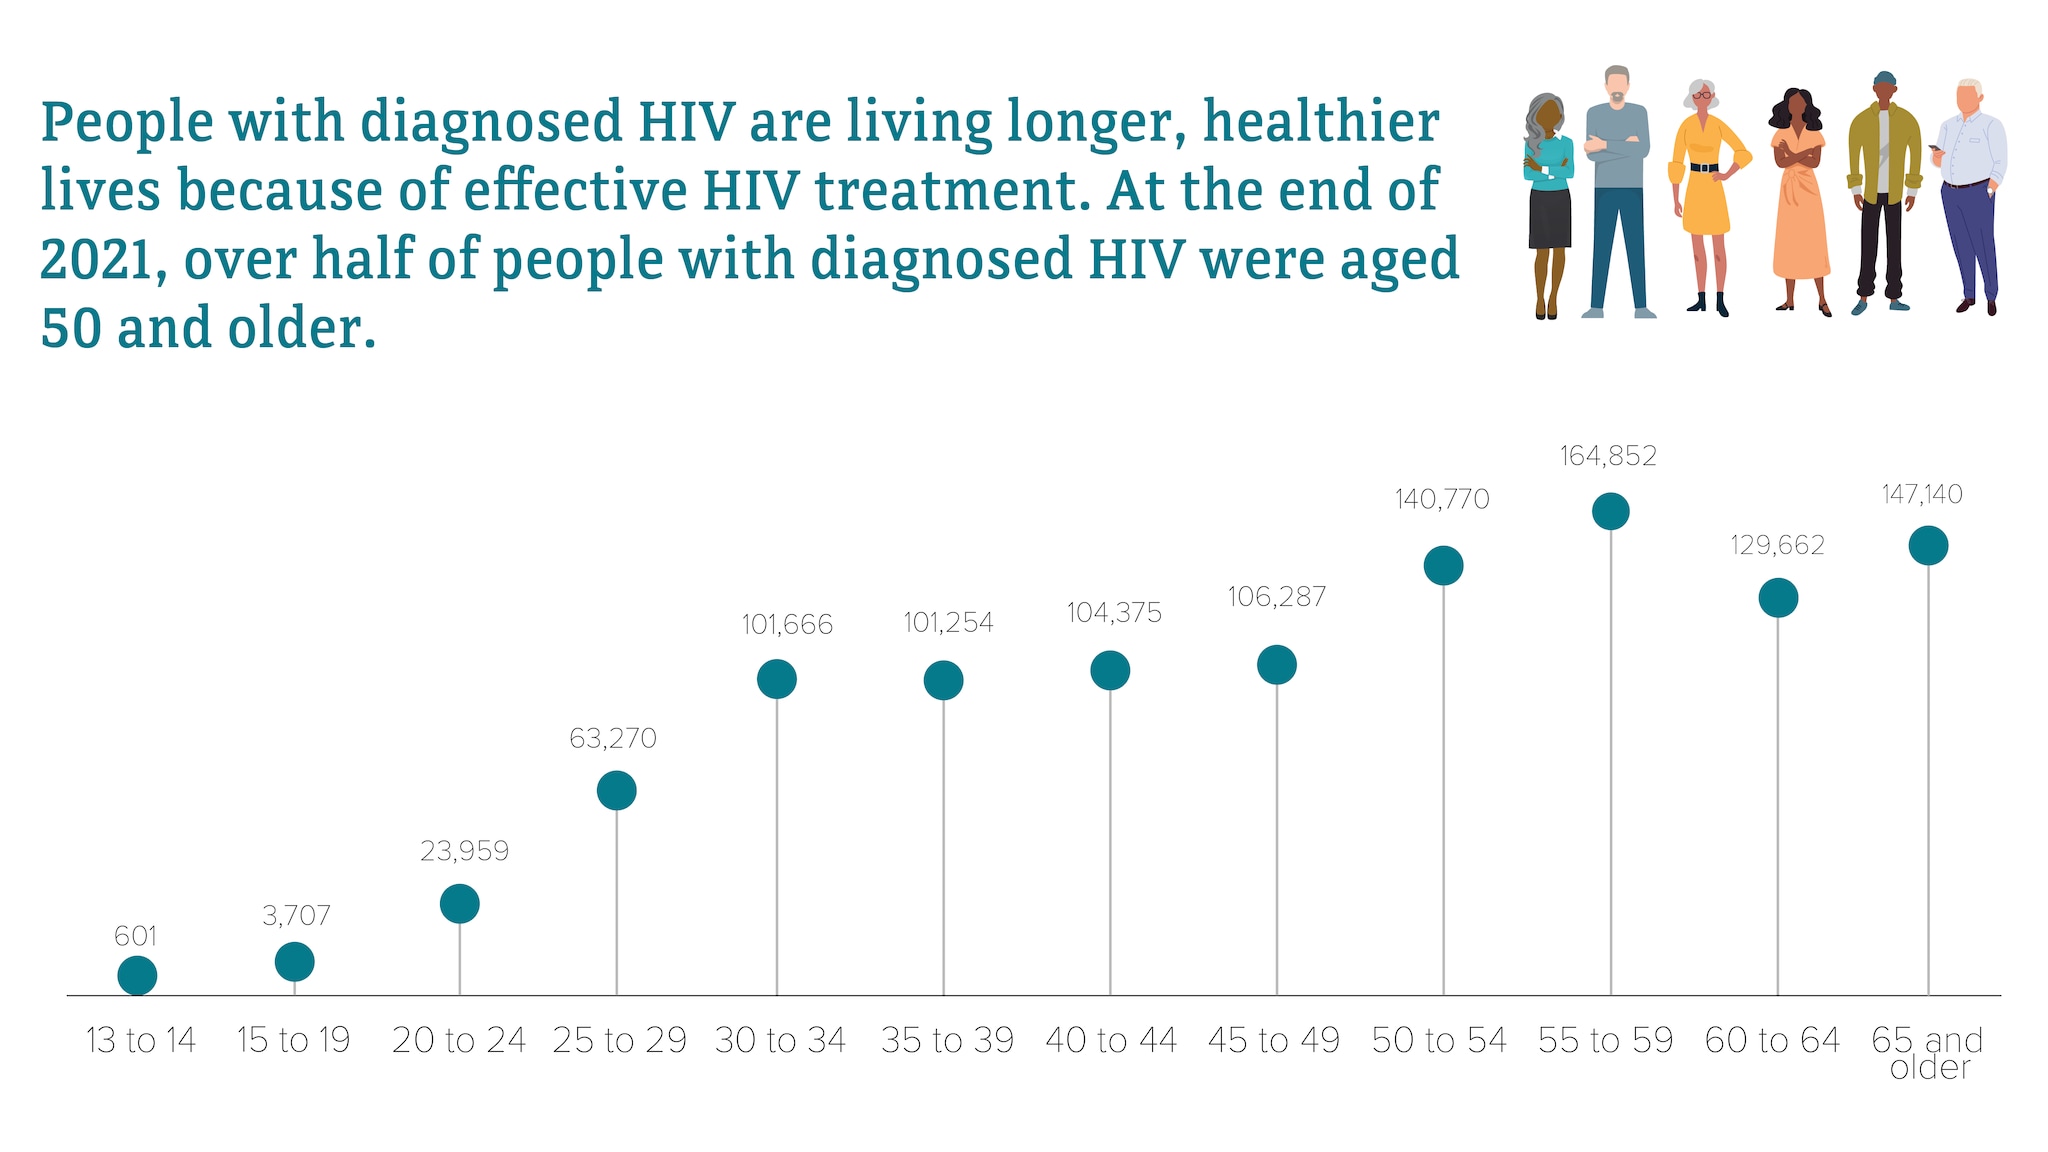 People with diagnosed HIV are living longer, healthier lives because of effective HIV treatment. At the end of 2021, over half of people with diagnosed HIV were aged 50 and older.